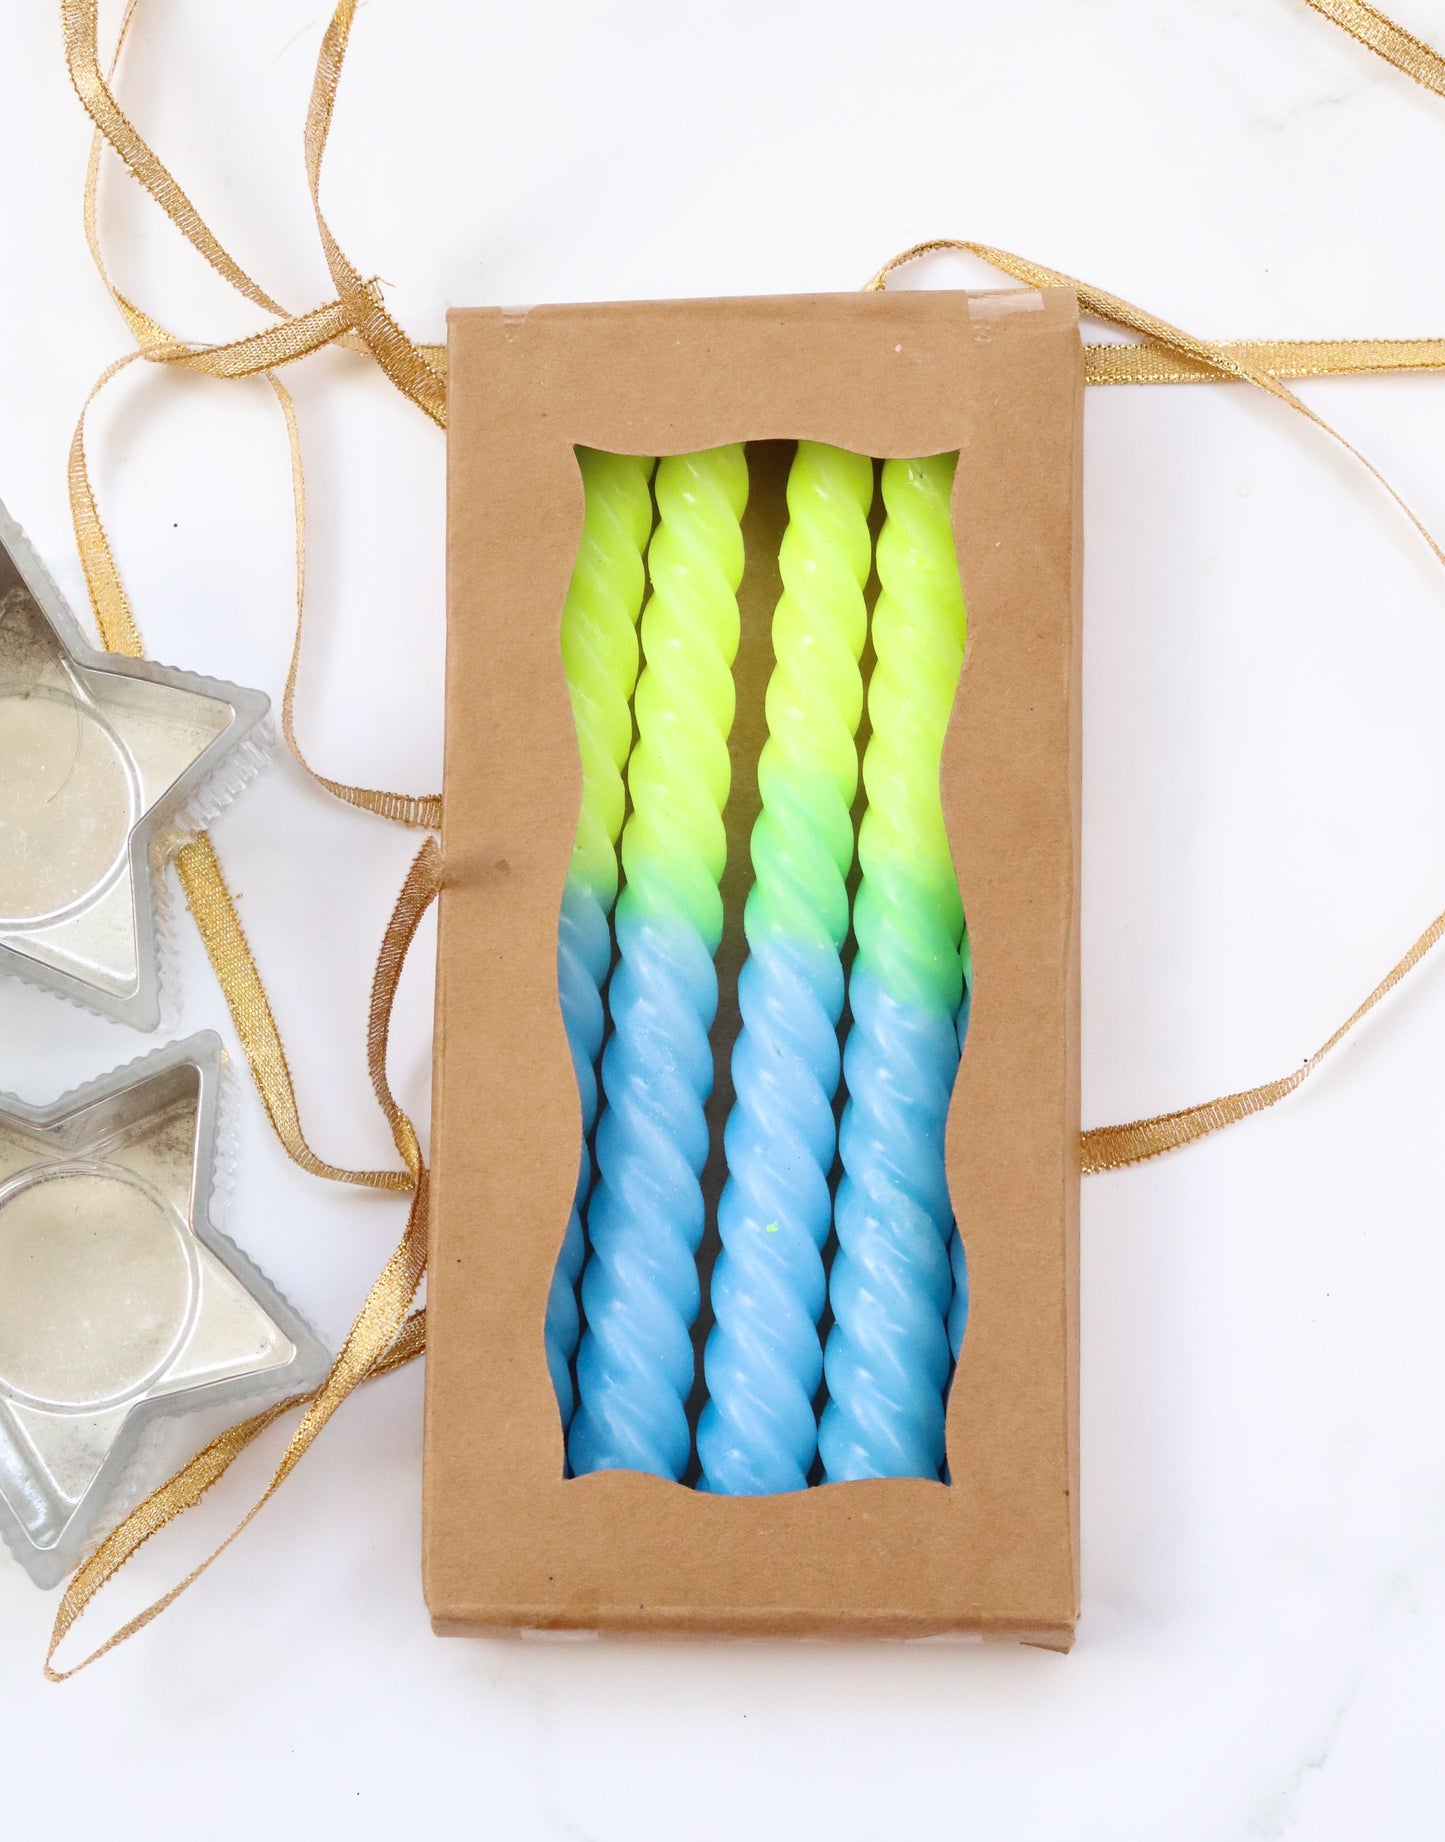 Twisted Candles - Dip dyed candles - Yellow and Blue tapered candles